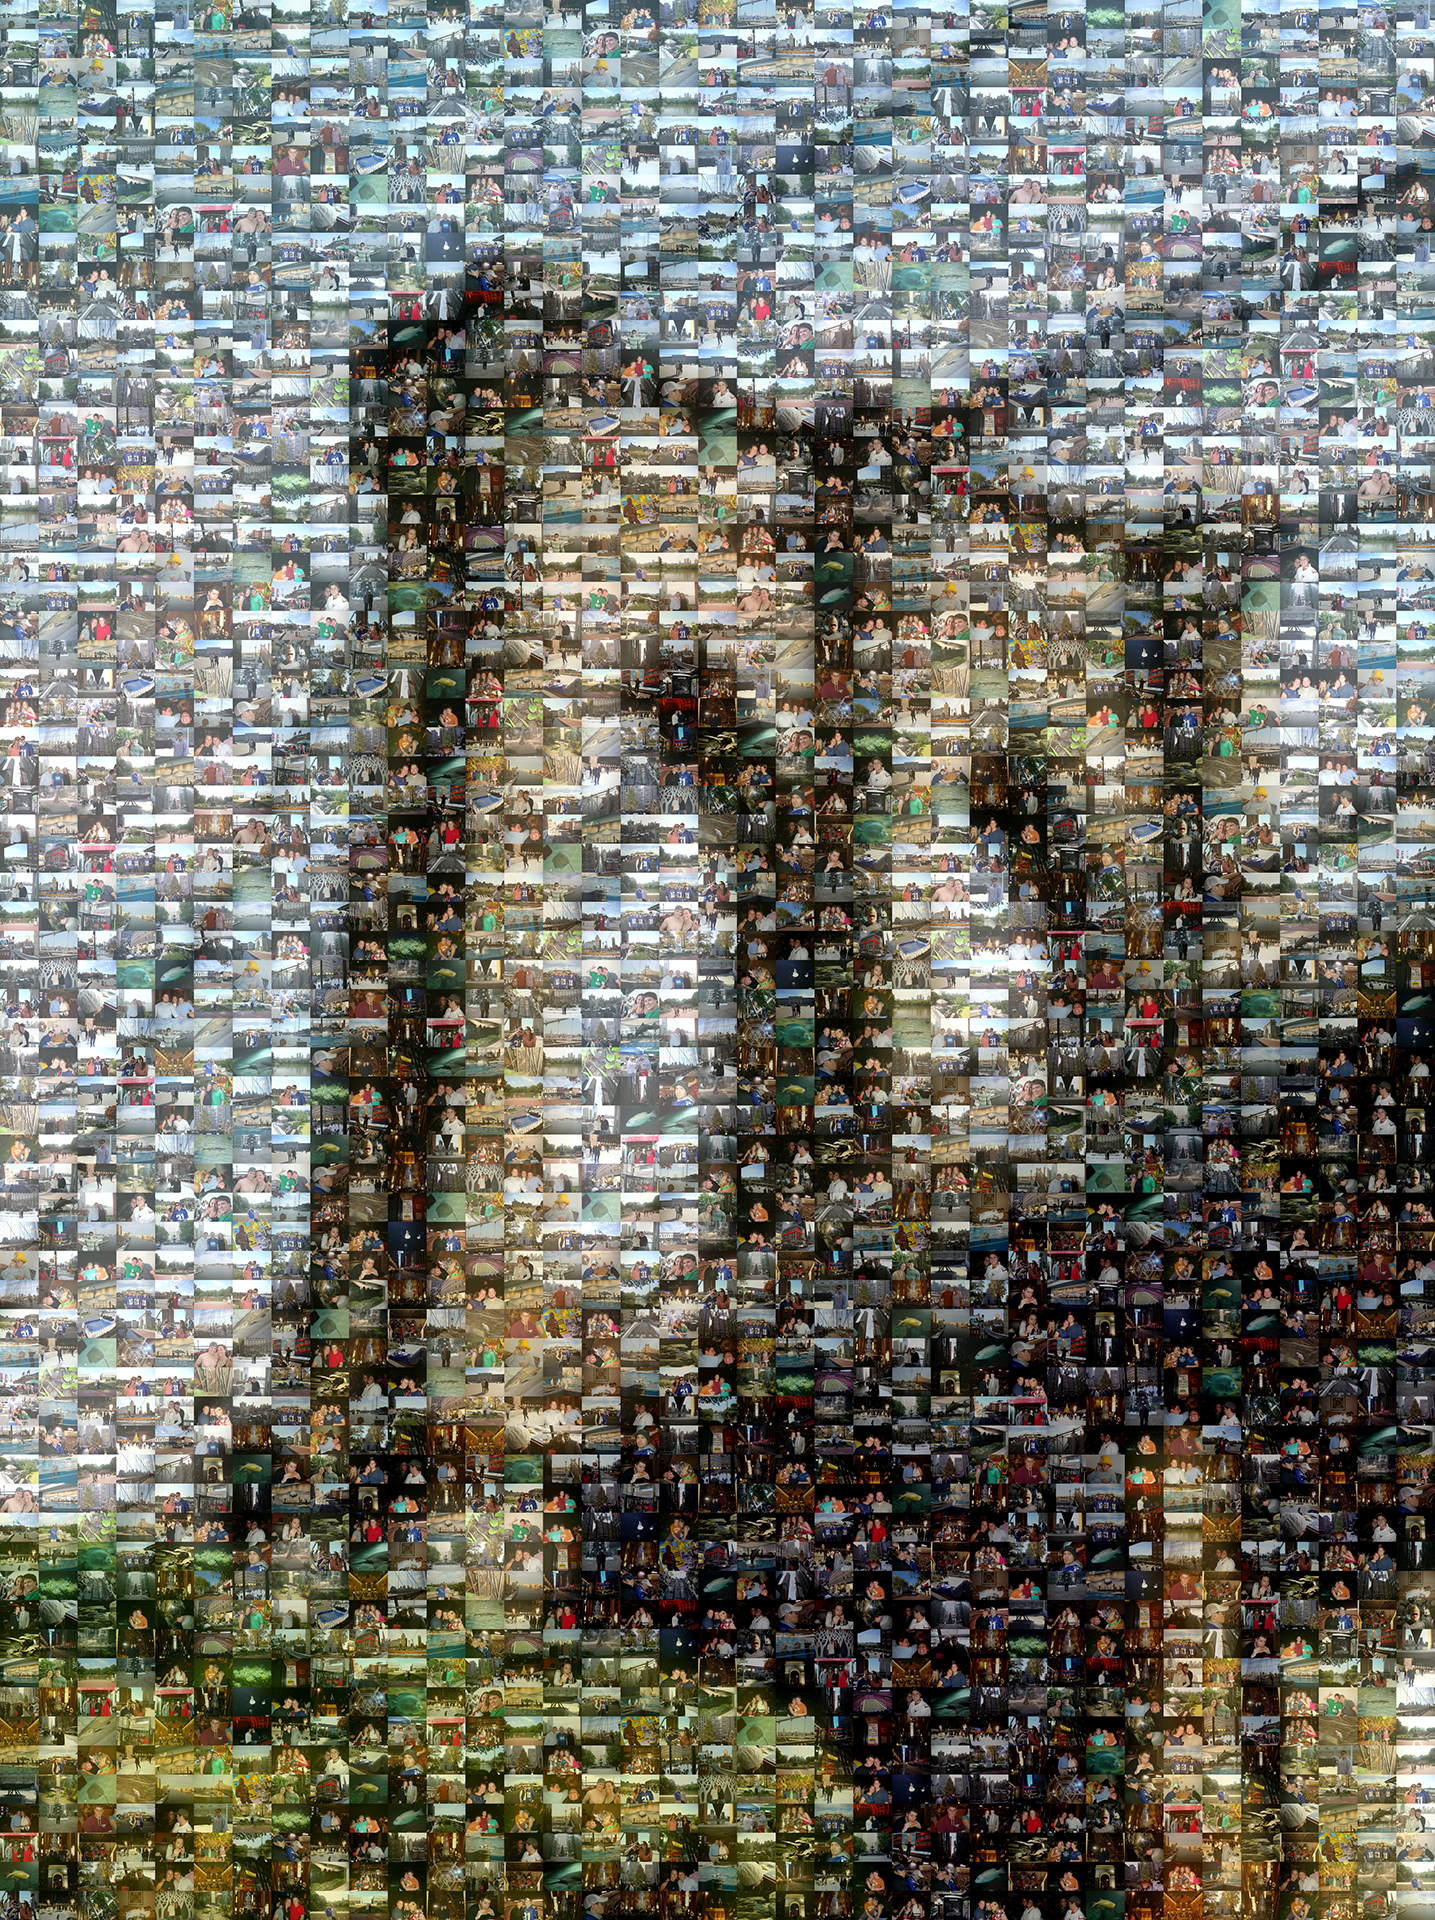 photo mosaic created using 196 user submitted photos